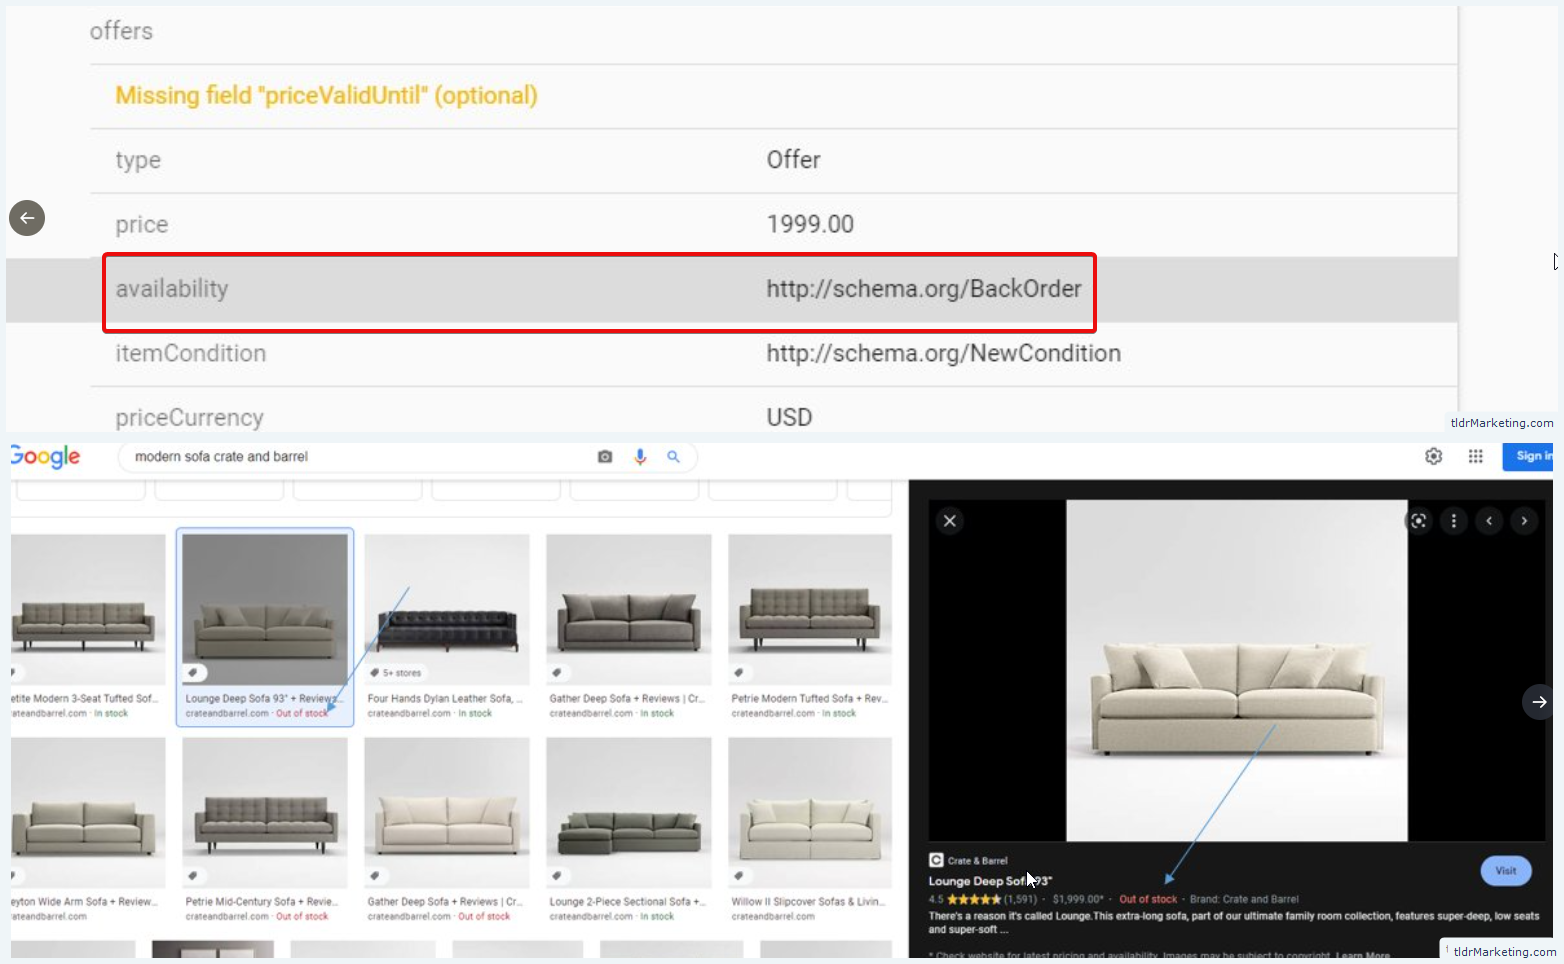 If You Use Backorder Availability In Structured Data Google May Show Them As Out Of Stock In SERPs